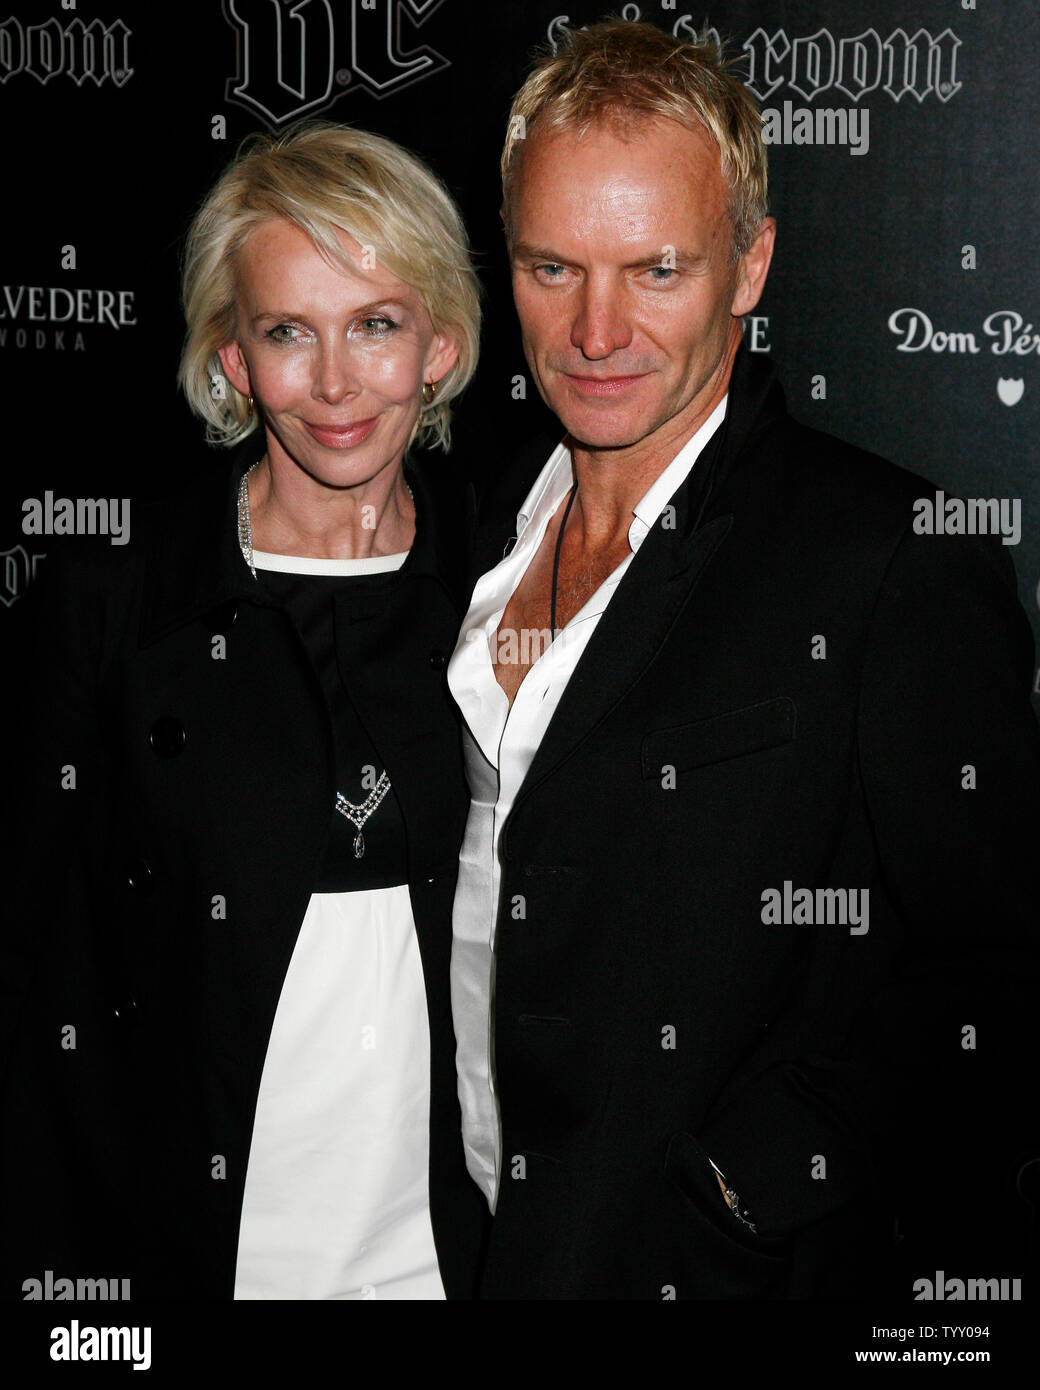 Wife Singer Sting Stock Photos & Wife Singer Sting Stock Images - Alamy